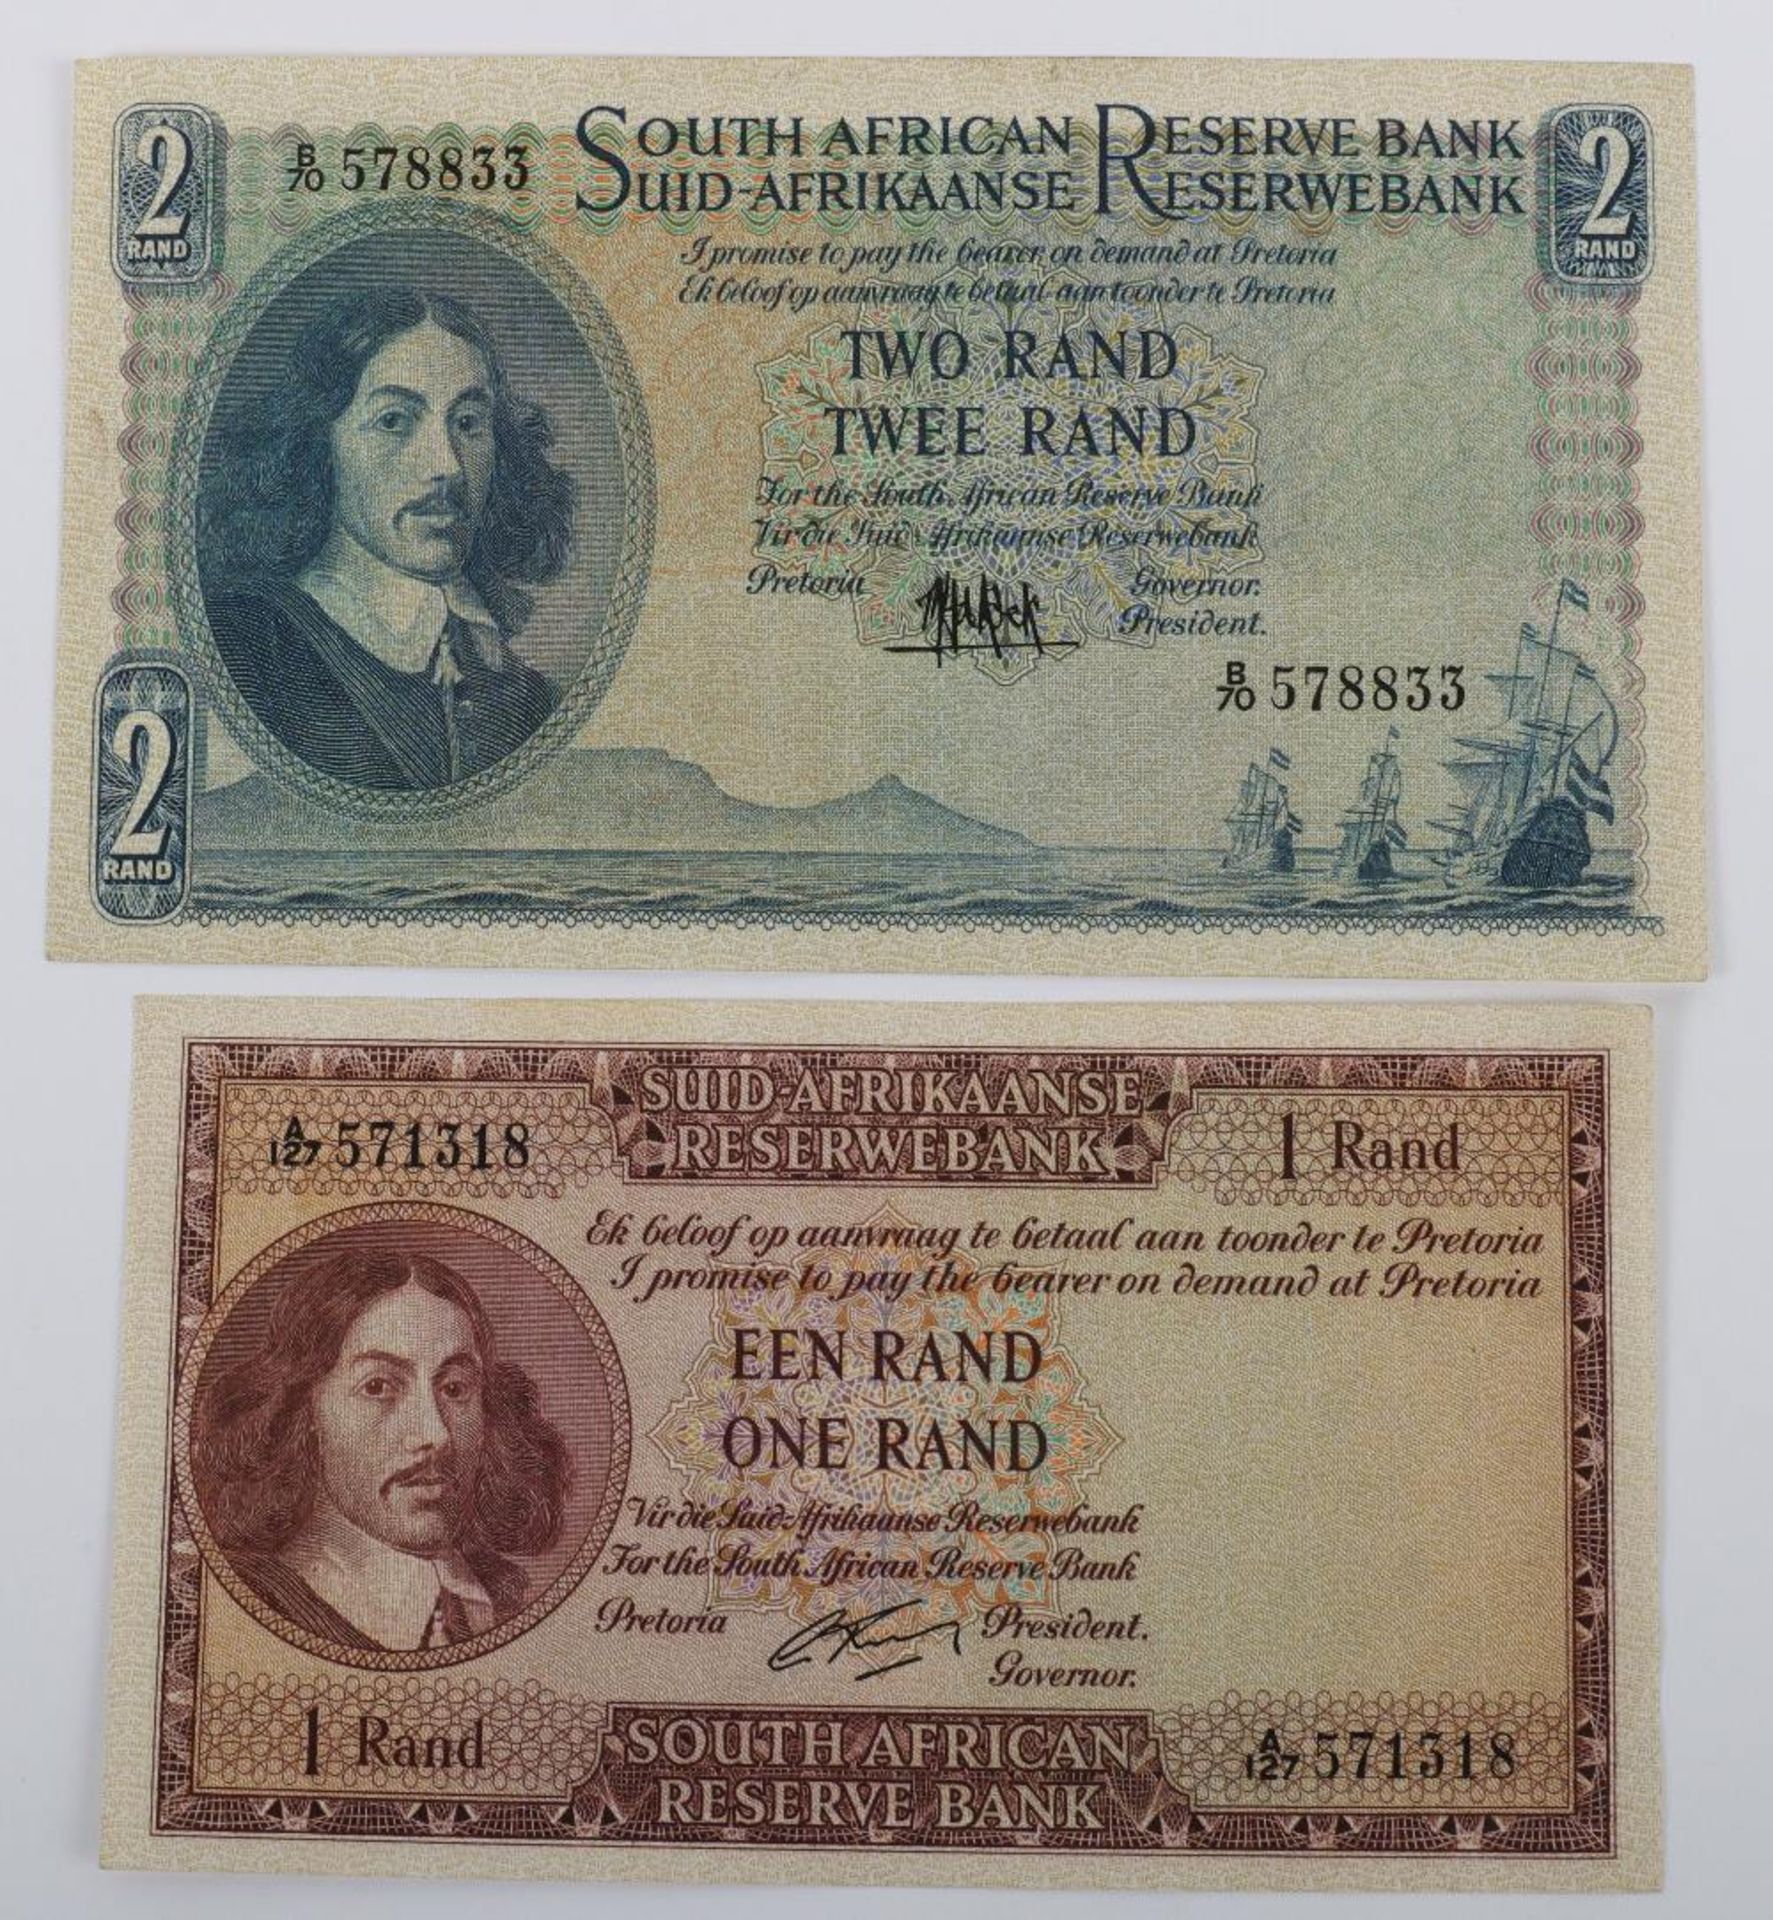 South Africa, ‘Bilingual’ Rands, 1961, One and Two Rand - Image 2 of 3